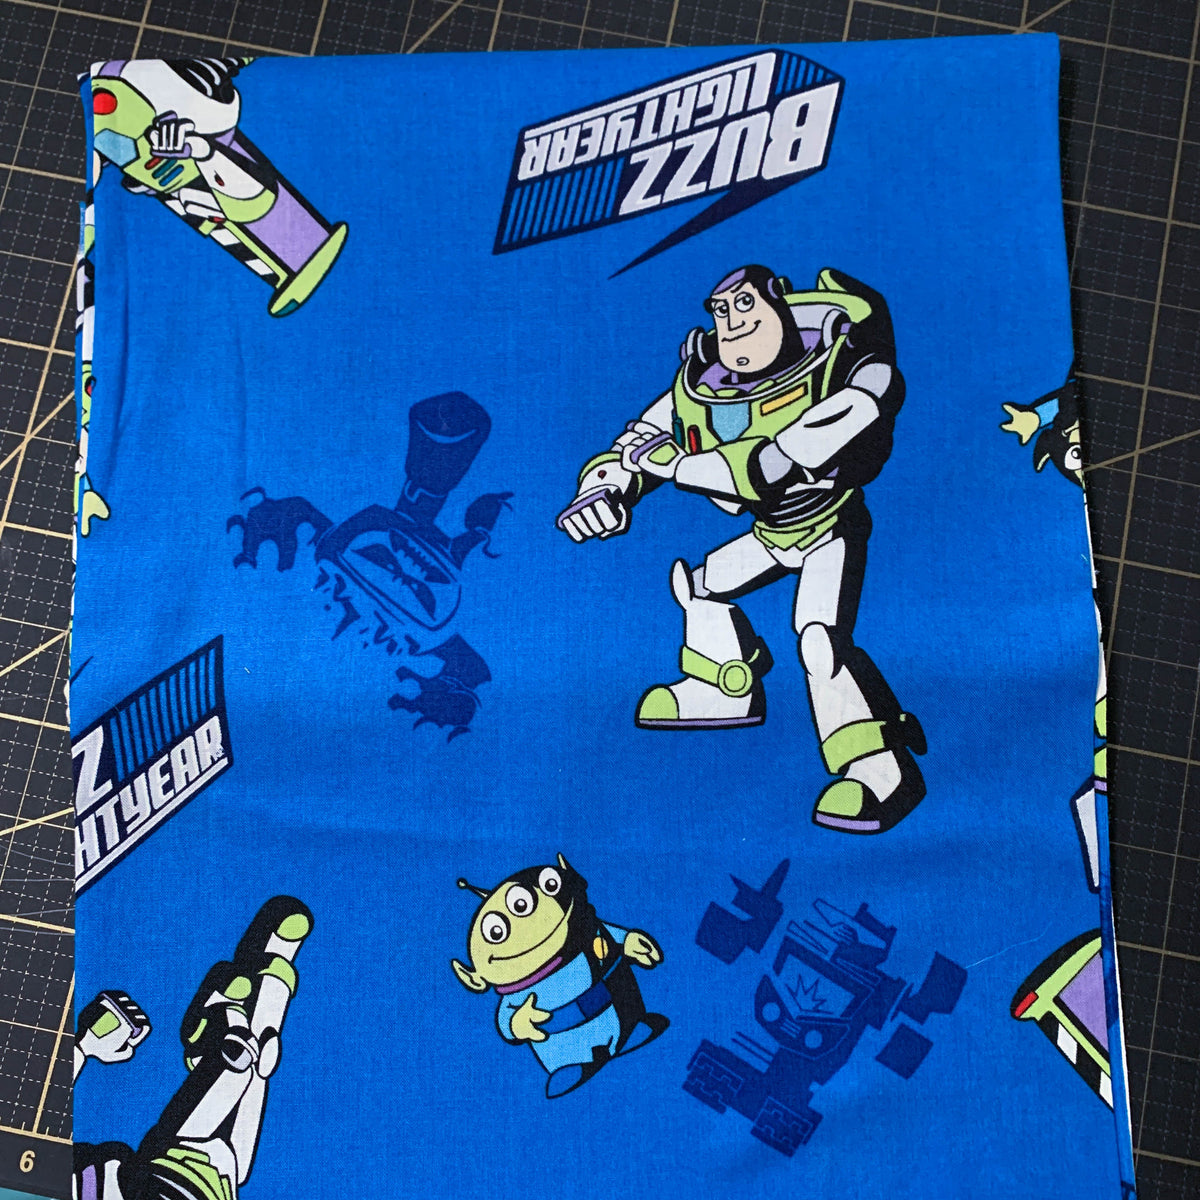 Buzz in Flight - Buzz Lightyear Cotton Fabric - Out of Print - 1 Yard